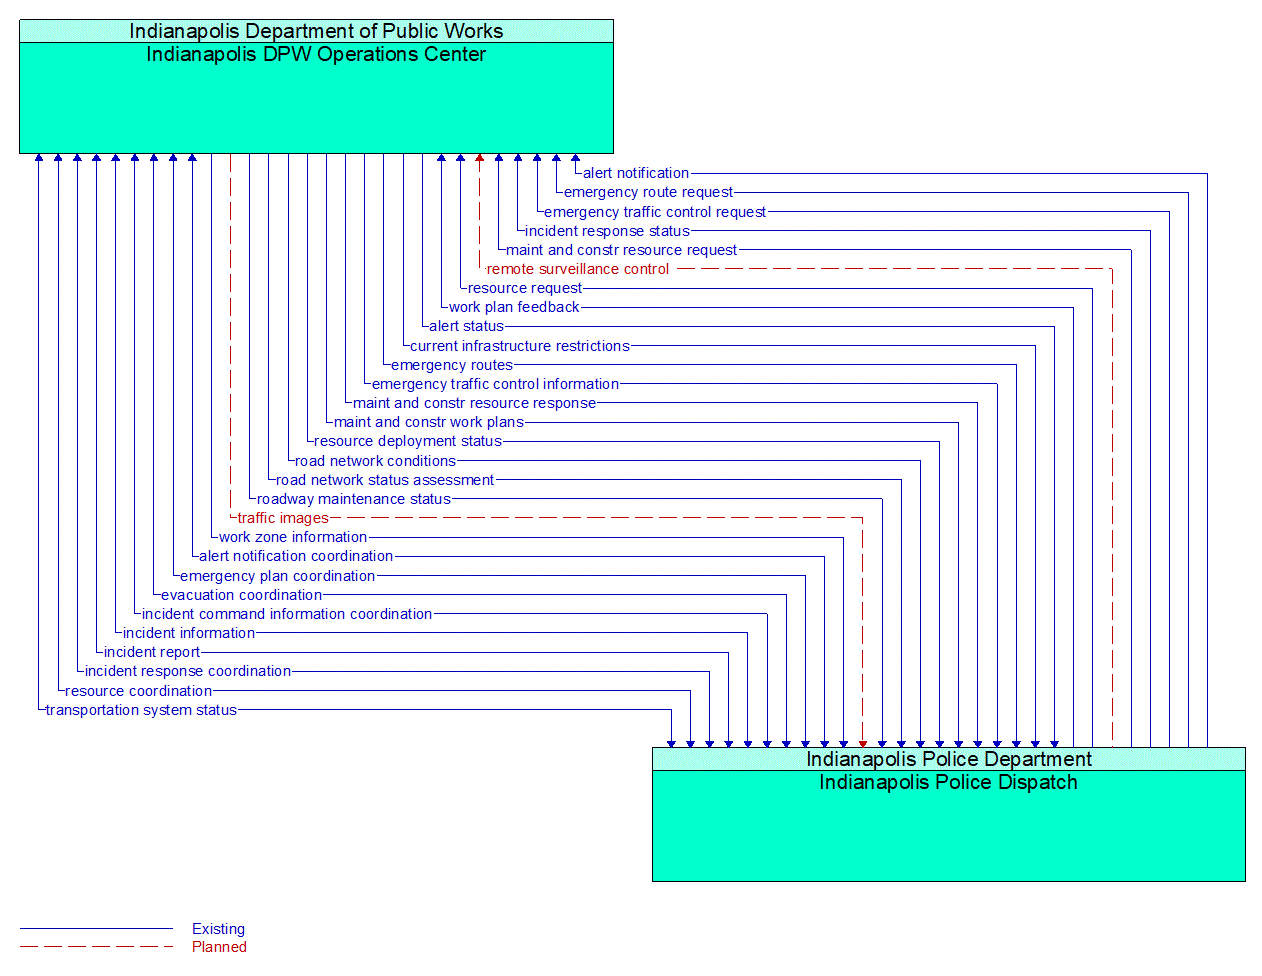 Architecture Flow Diagram: Indianapolis Police Dispatch <--> Indianapolis DPW Operations Center